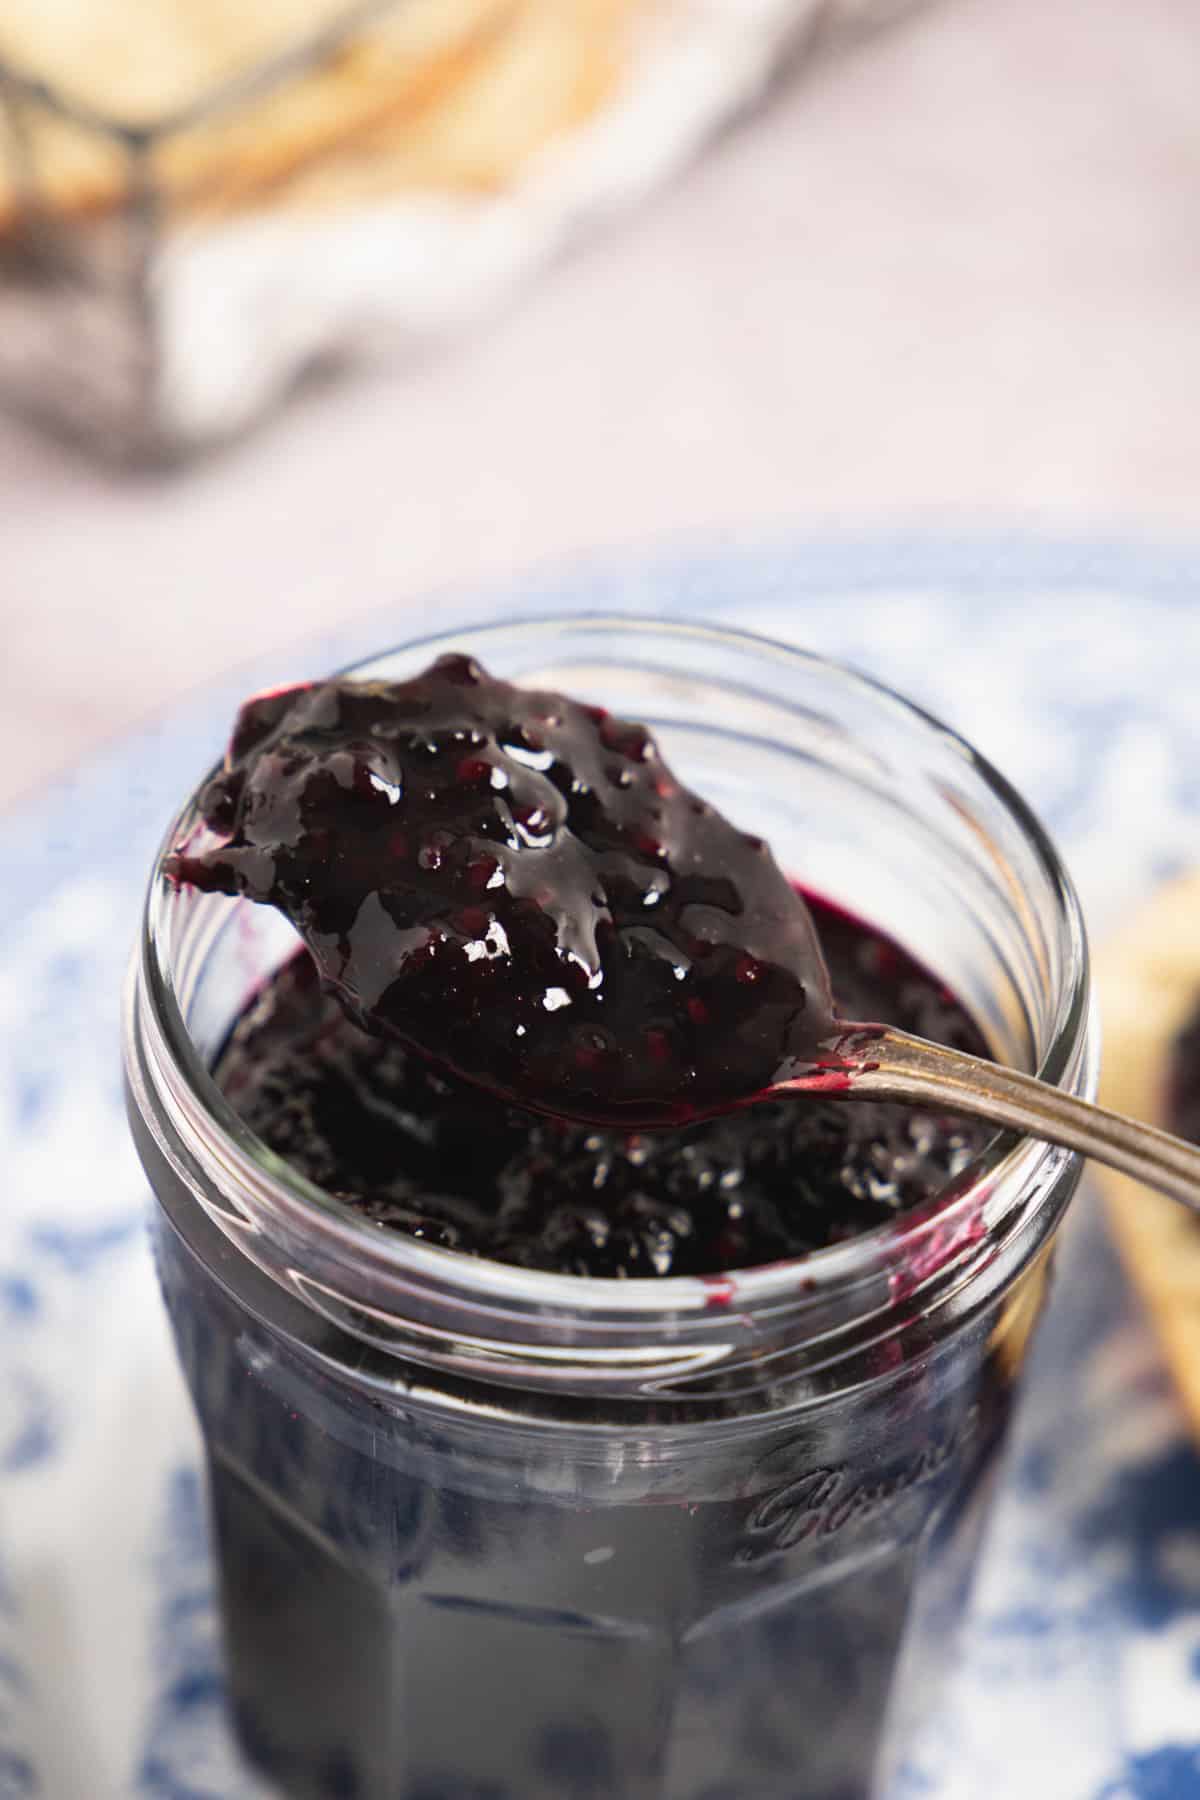 Close up of a spoon in the blackberry jam jar.